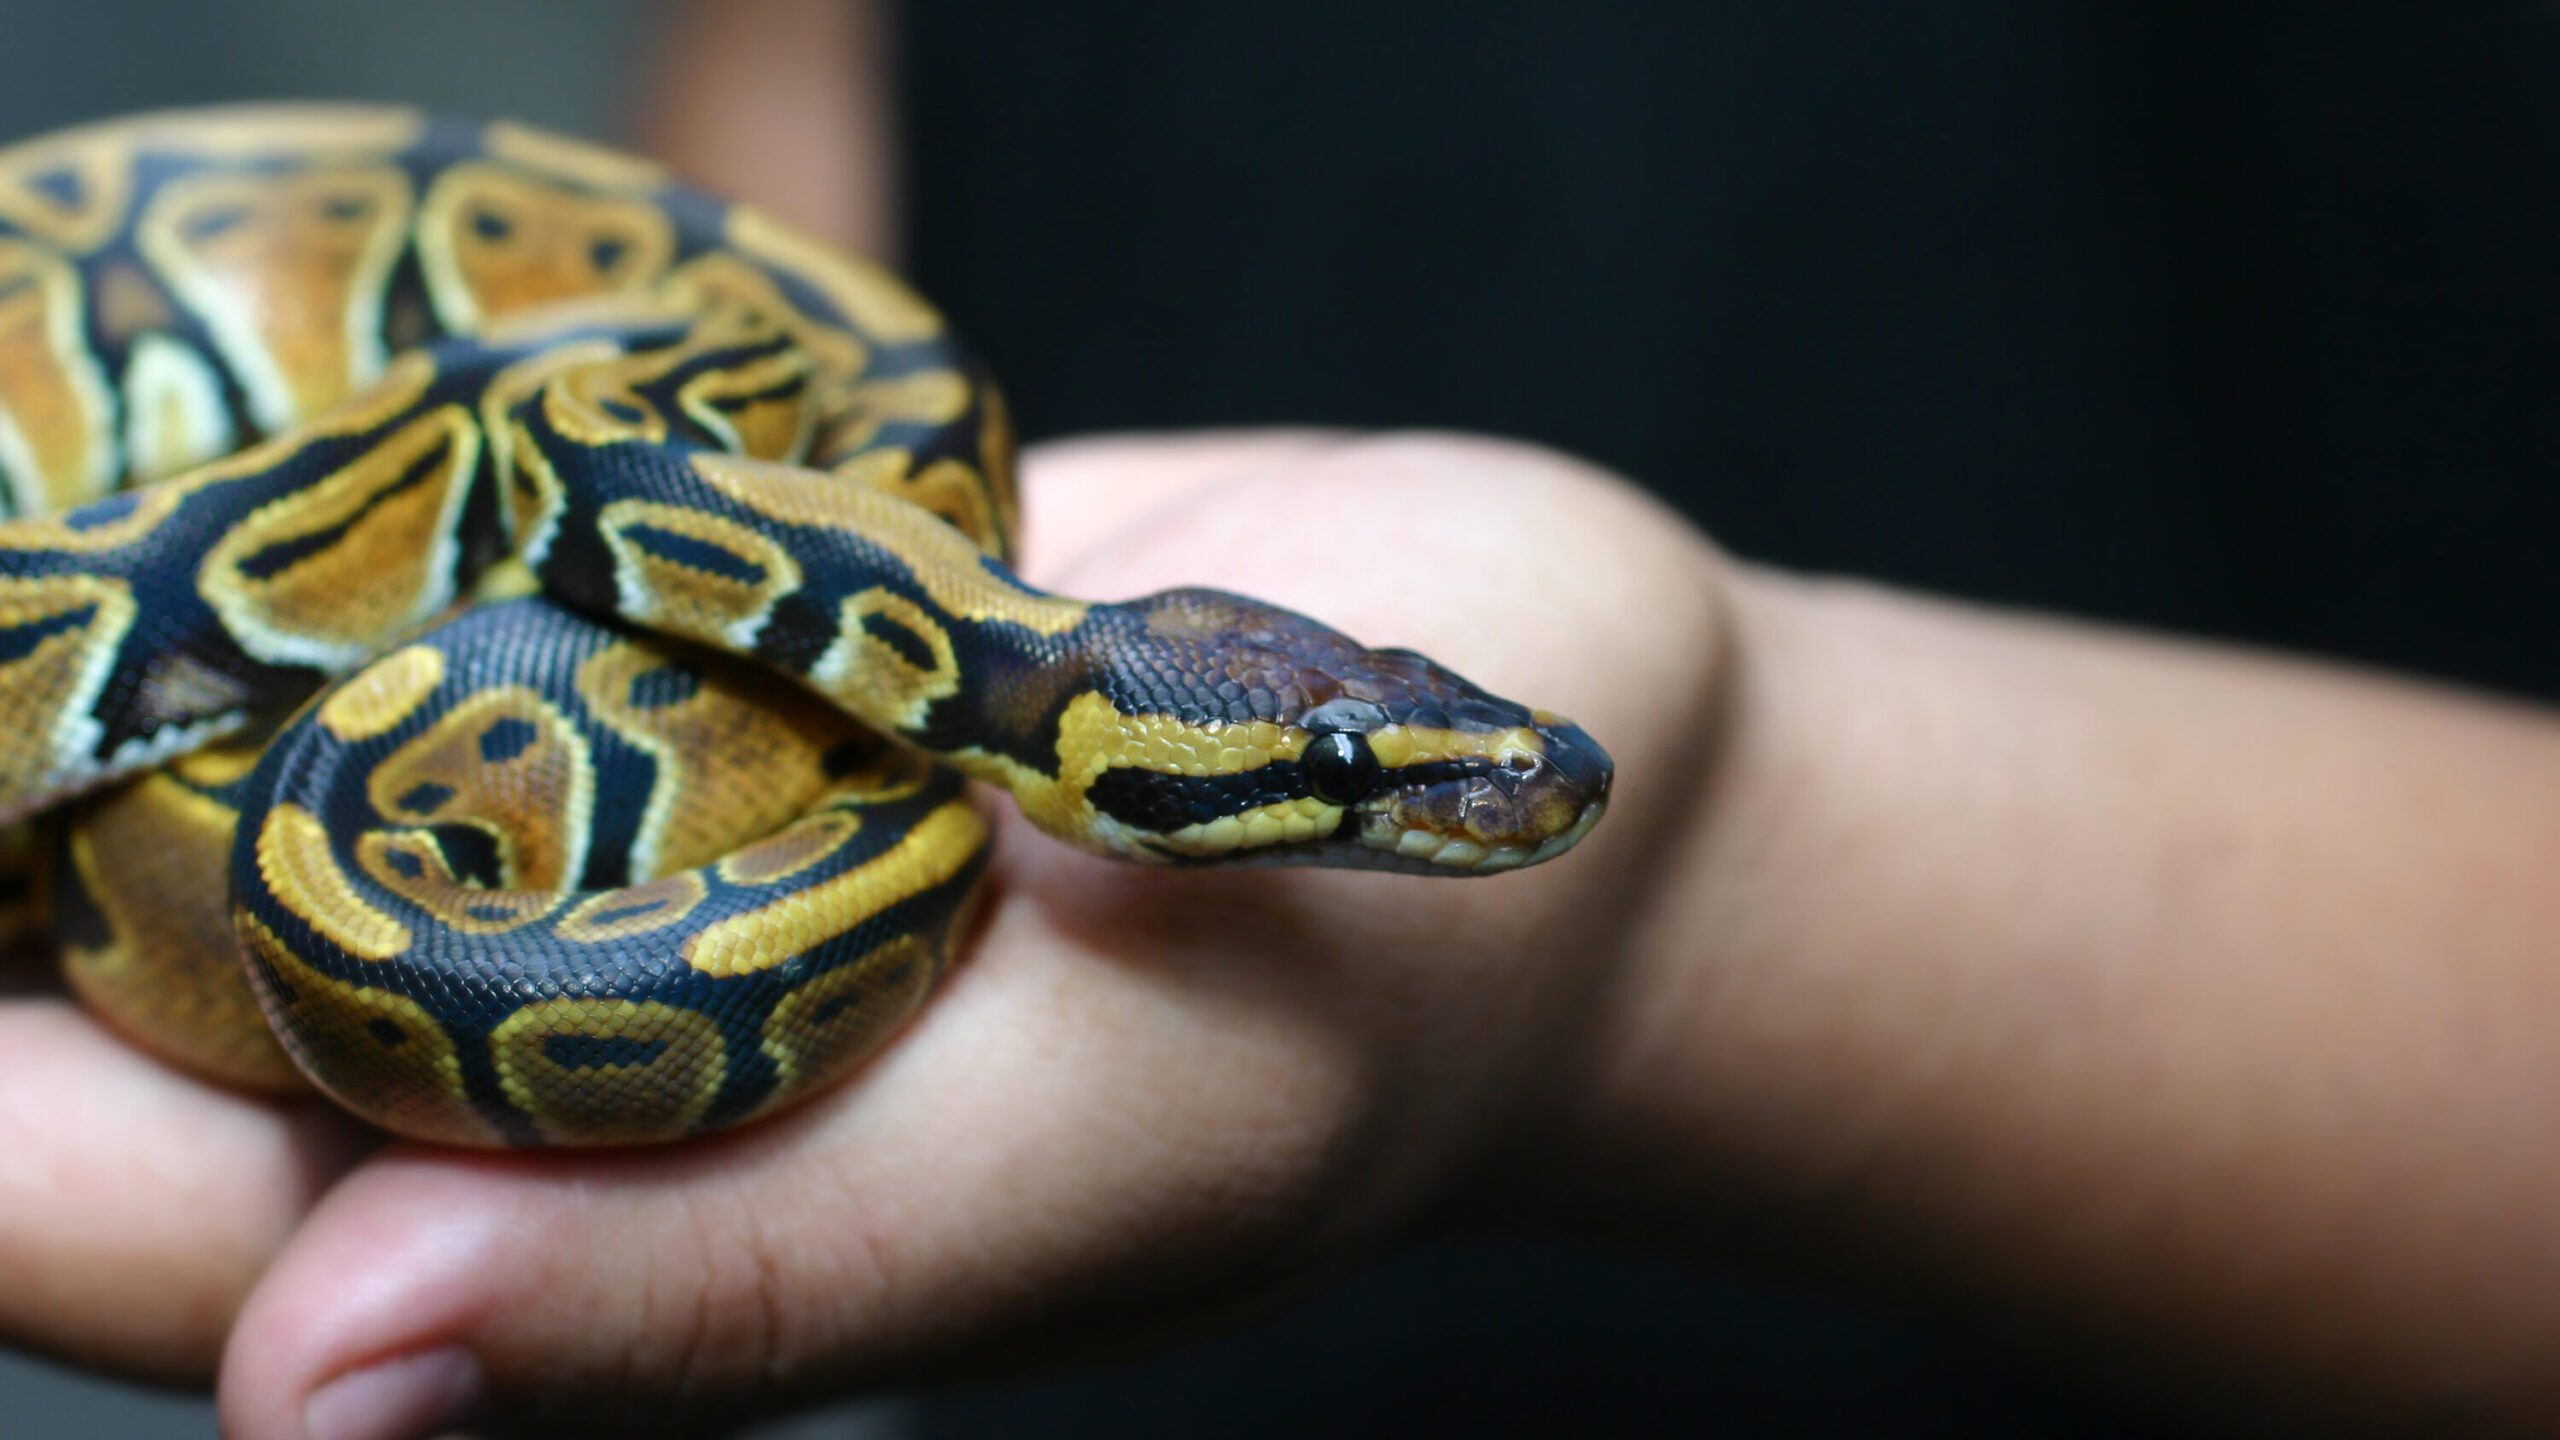 In this blog we provide you with a comprehensive guide to preparing your home for the arrival of your new pet snake!